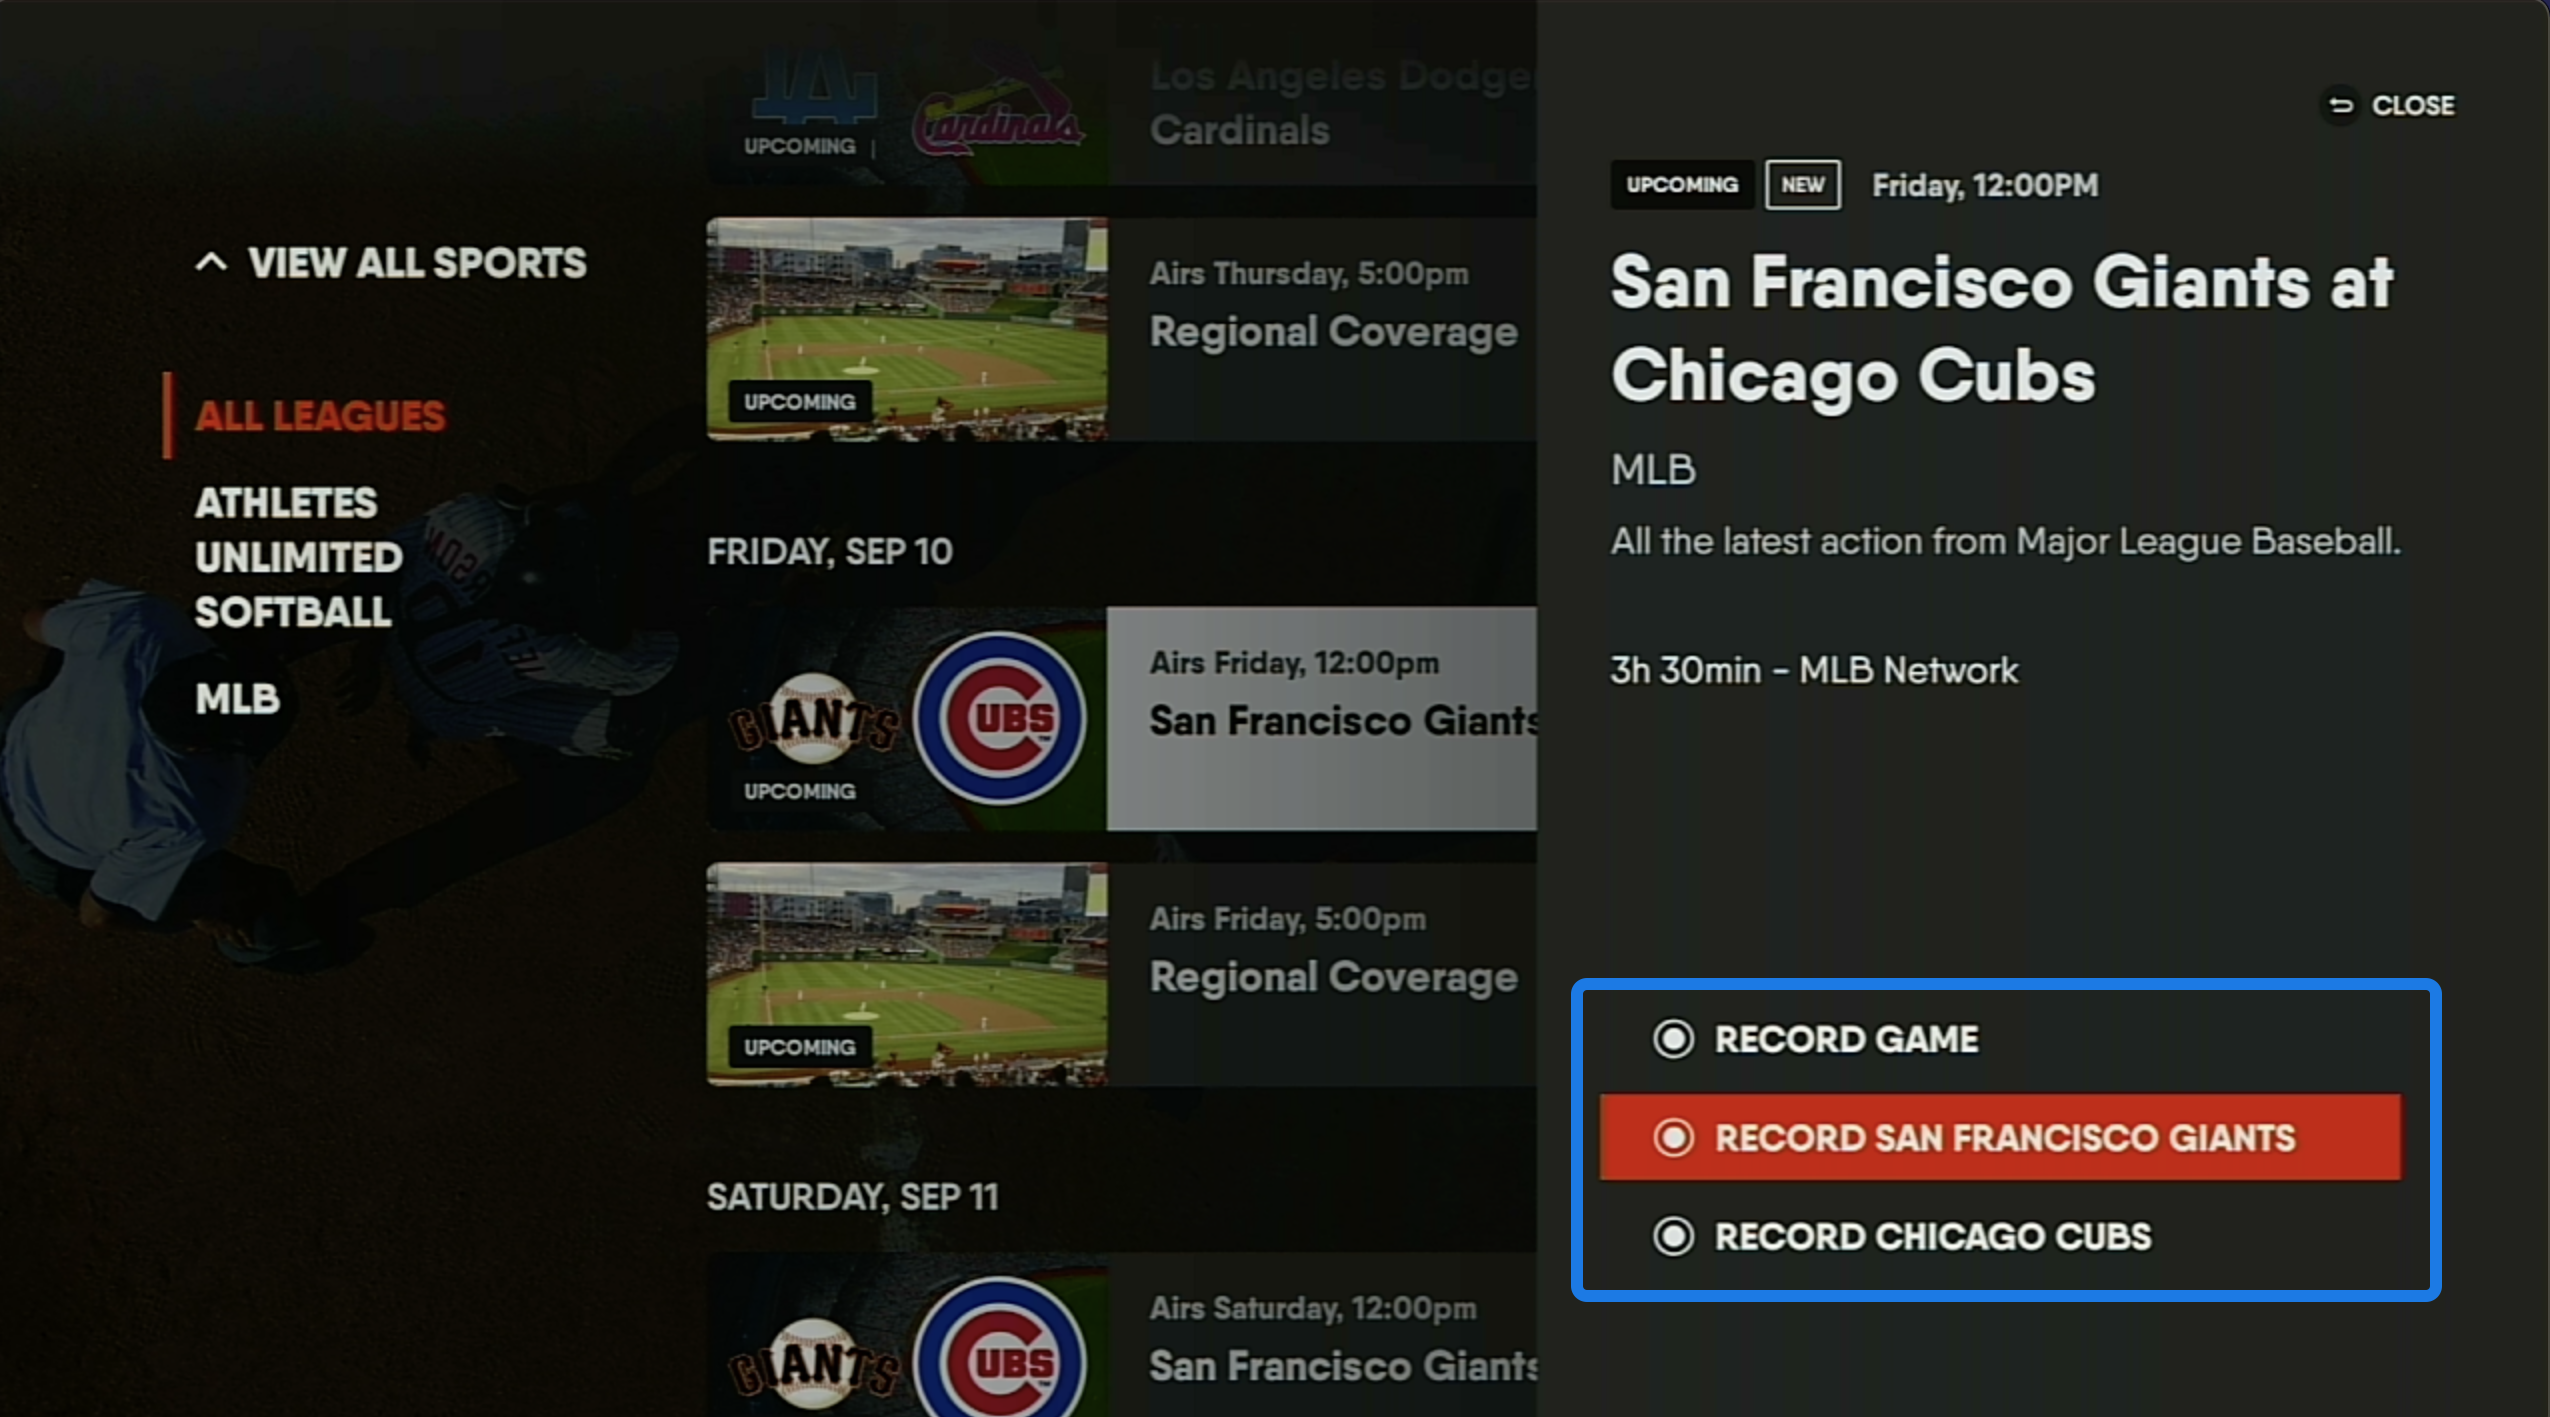 Program information screen for an upcoming baseball game on the FuboTV app for Amazon Fire TV with RECORDING OPTIONS highlighted